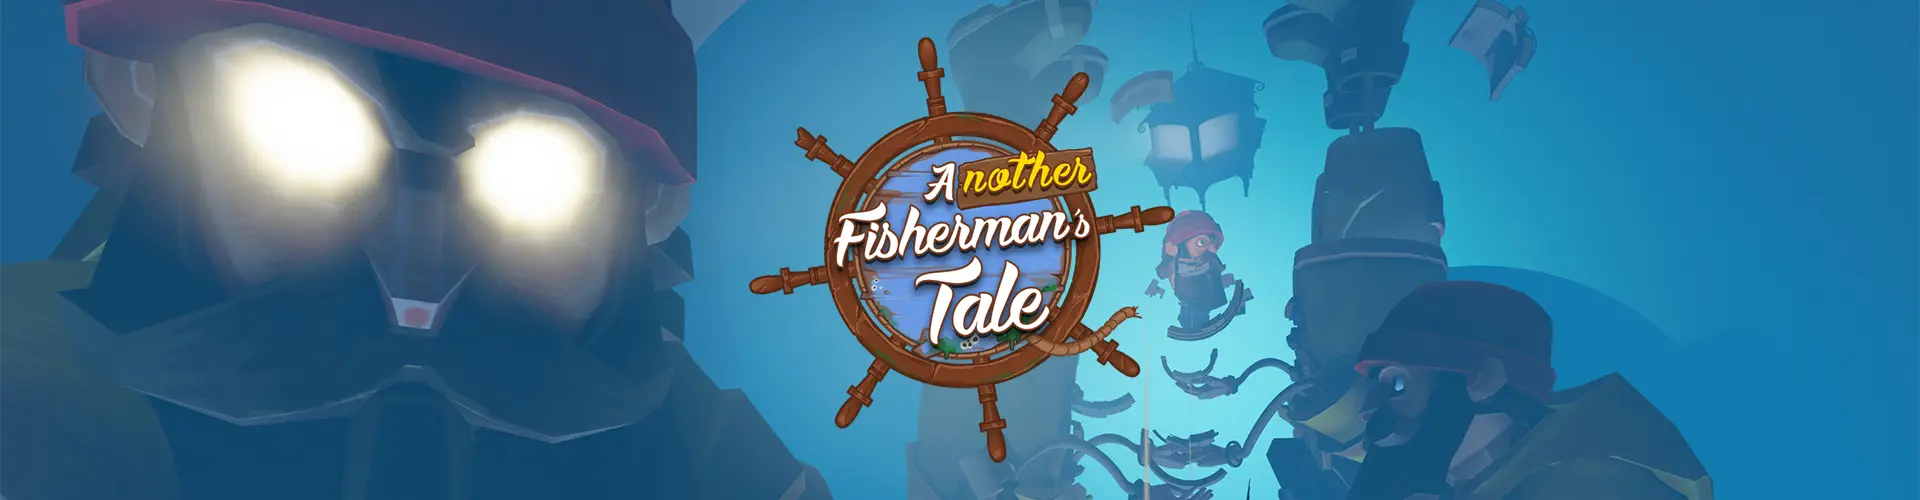 Another Fisherman's Tale banner